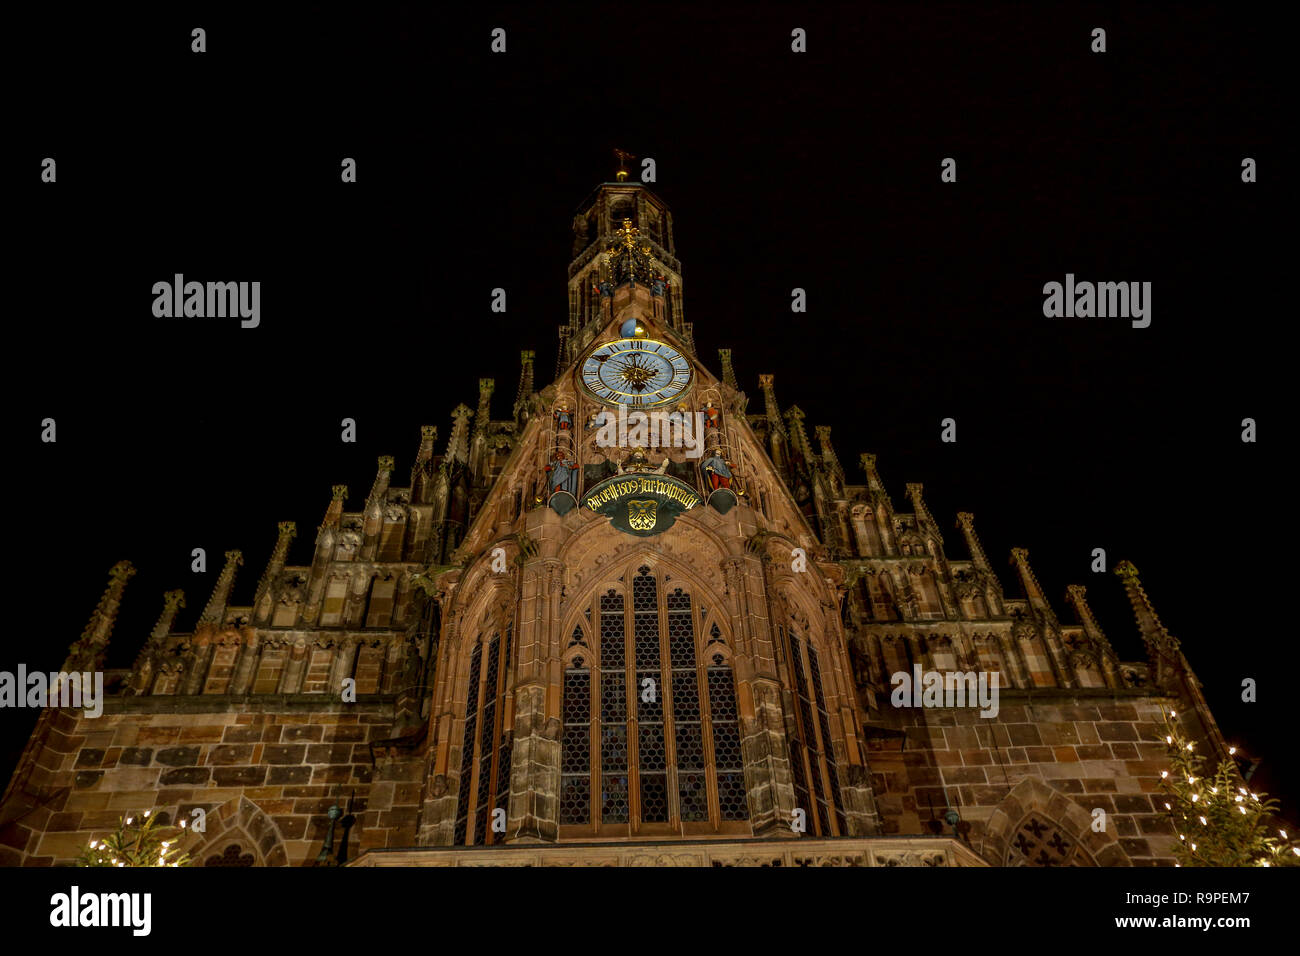 The Frauenkirche (Church of Our Lady), Nuremberg, Bavaria, Germany. Stock Photo